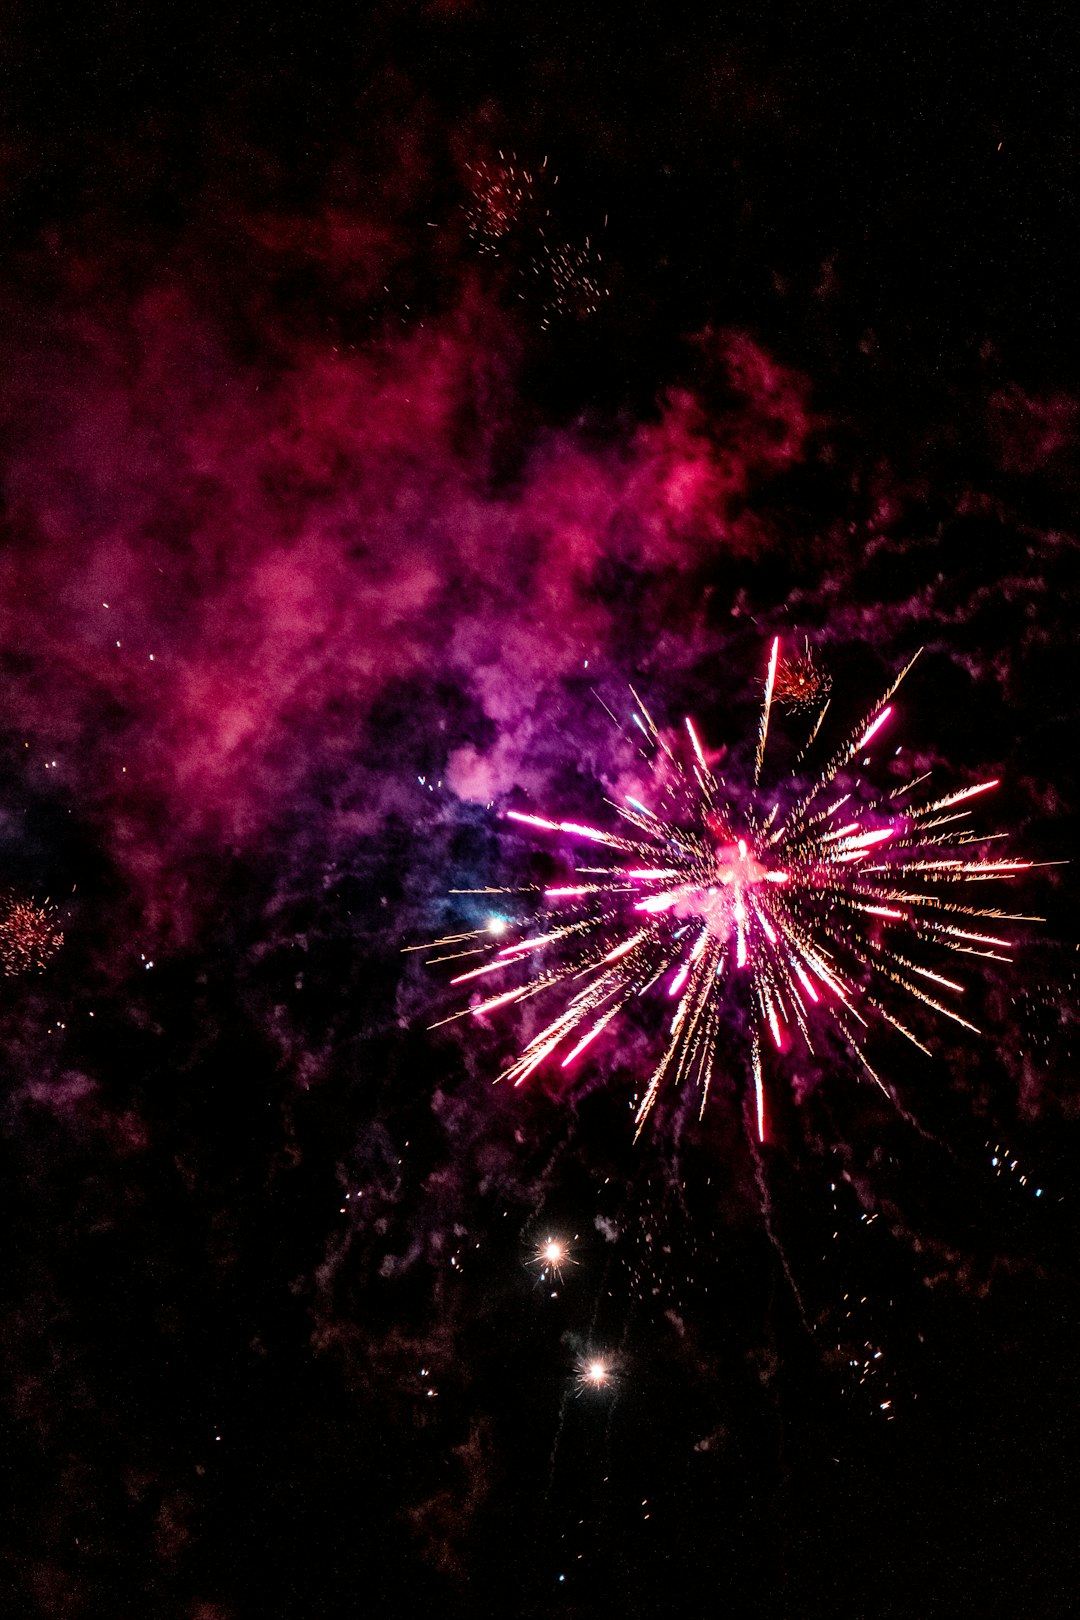 purple and white fireworks display